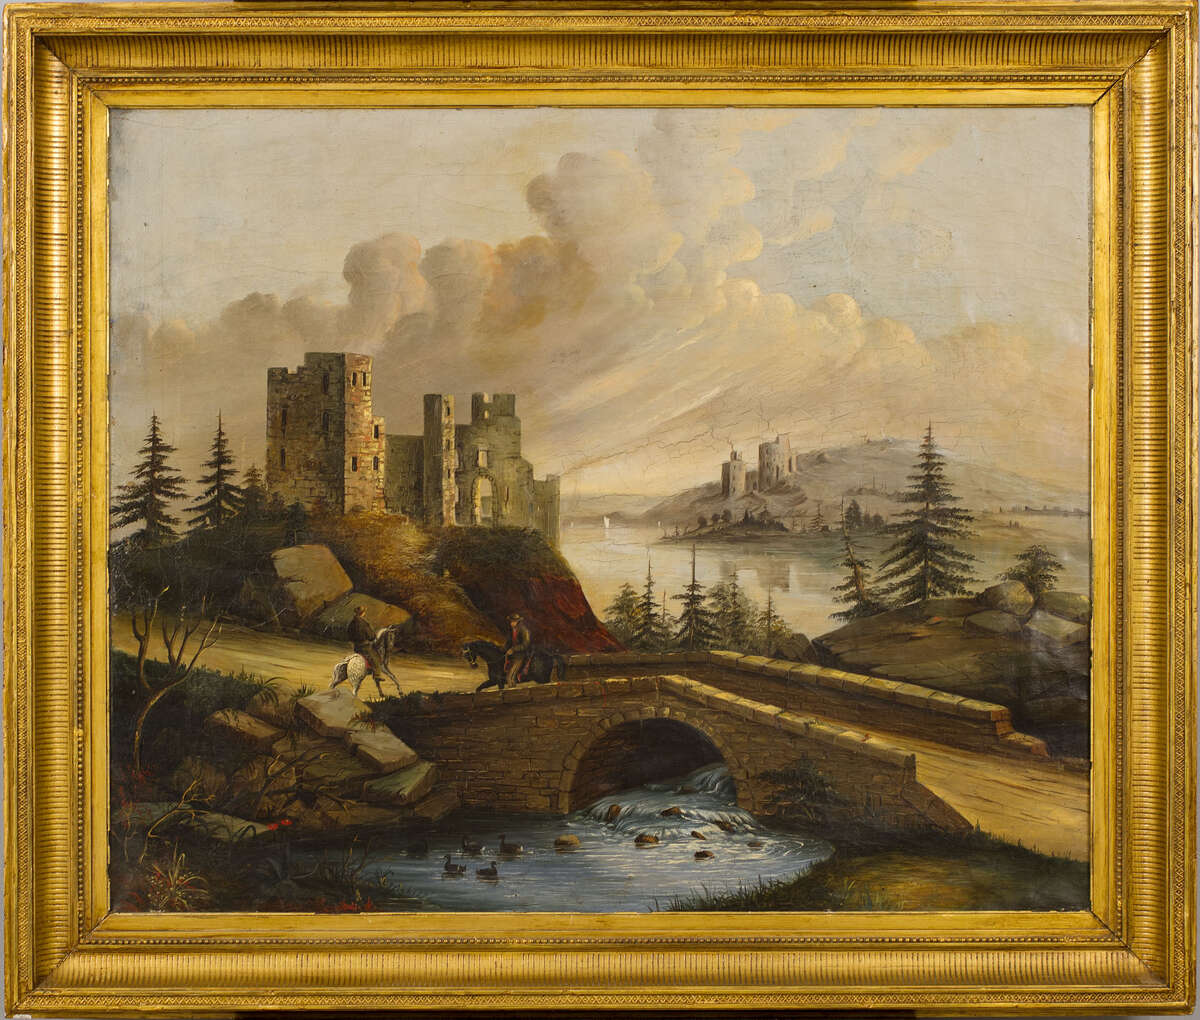 European Scene with Stone Bridge Joseph H. Hidley c. 1860s Oil on canvas Collection of Wayne Edsforth at Albany Institute of History and Art. (Courtesy Albany Institute of History and Art)